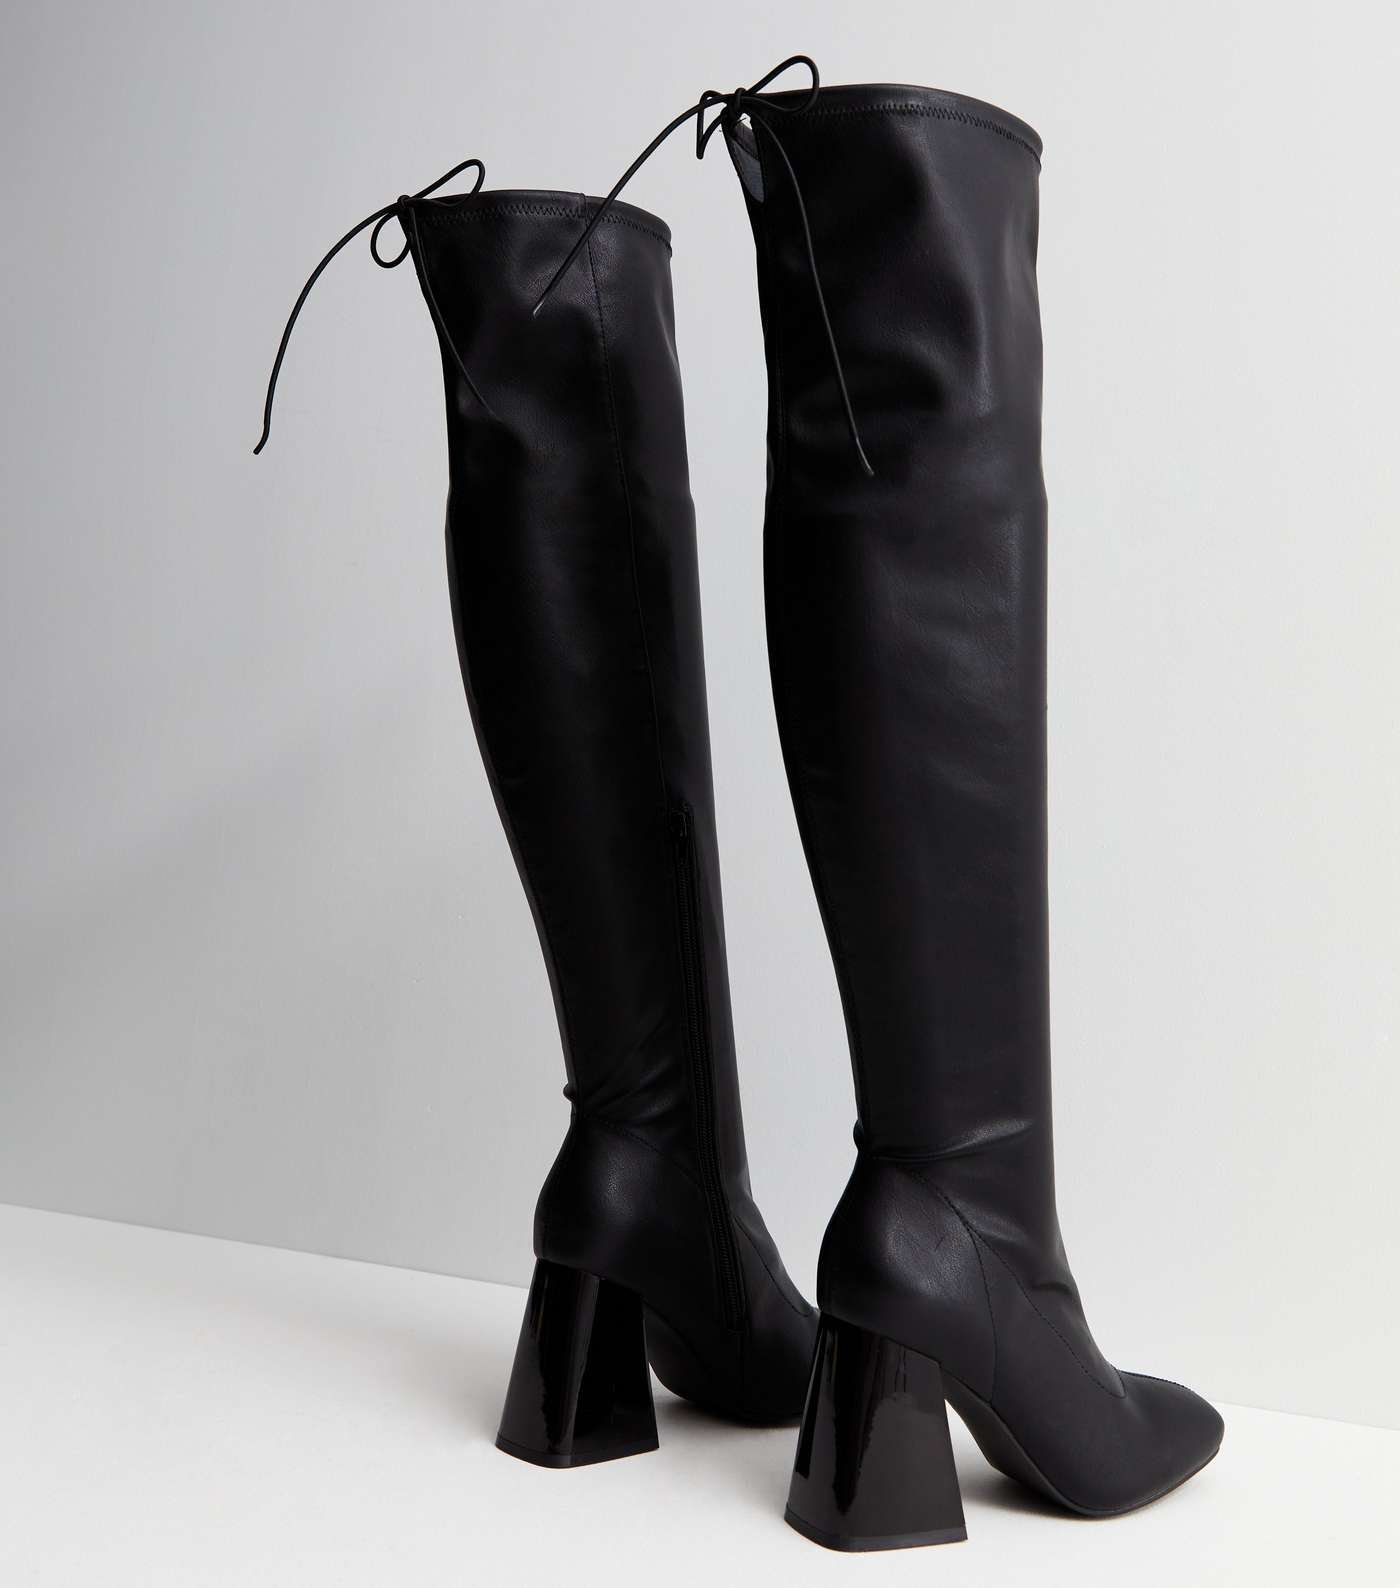 Black Over the Knee Flared Block Heel Stretch Boots Image 3